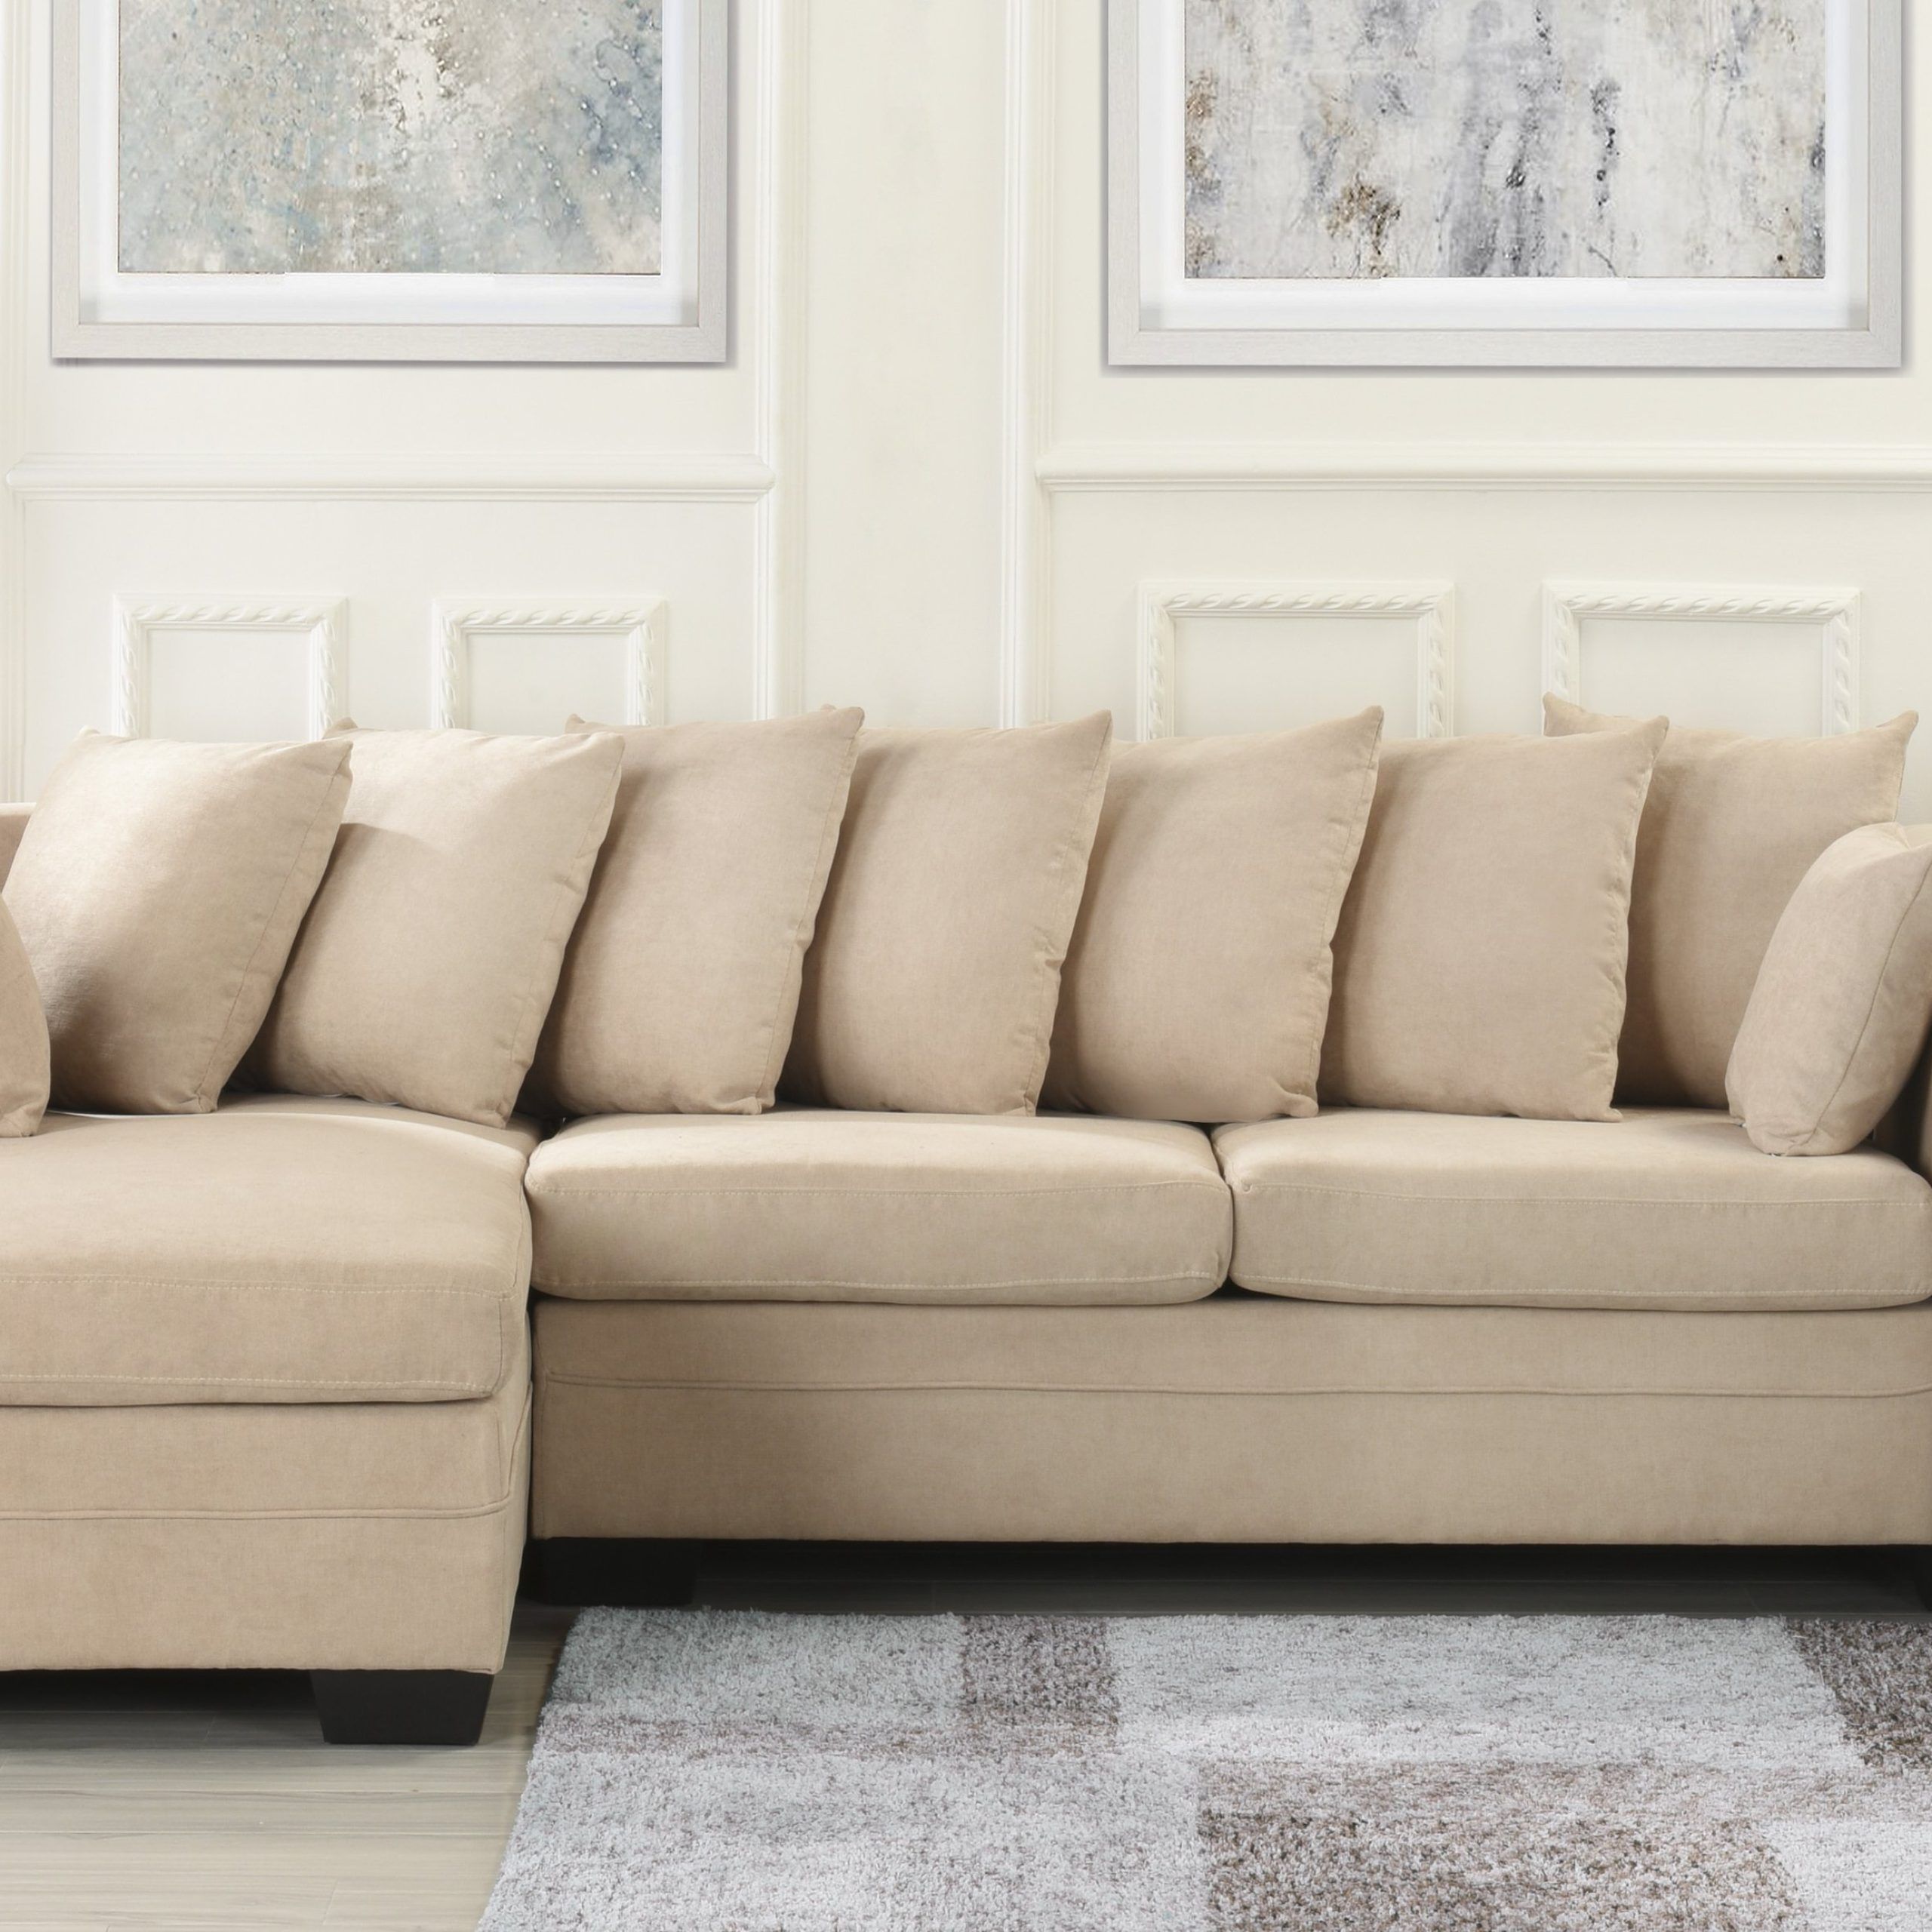 Recent Small L Shaped Sectional Sofas In Beige Throughout Large Brush Microfiber Sectional Sofa, L Shape Couch Extra Wide Chaise (View 8 of 15)